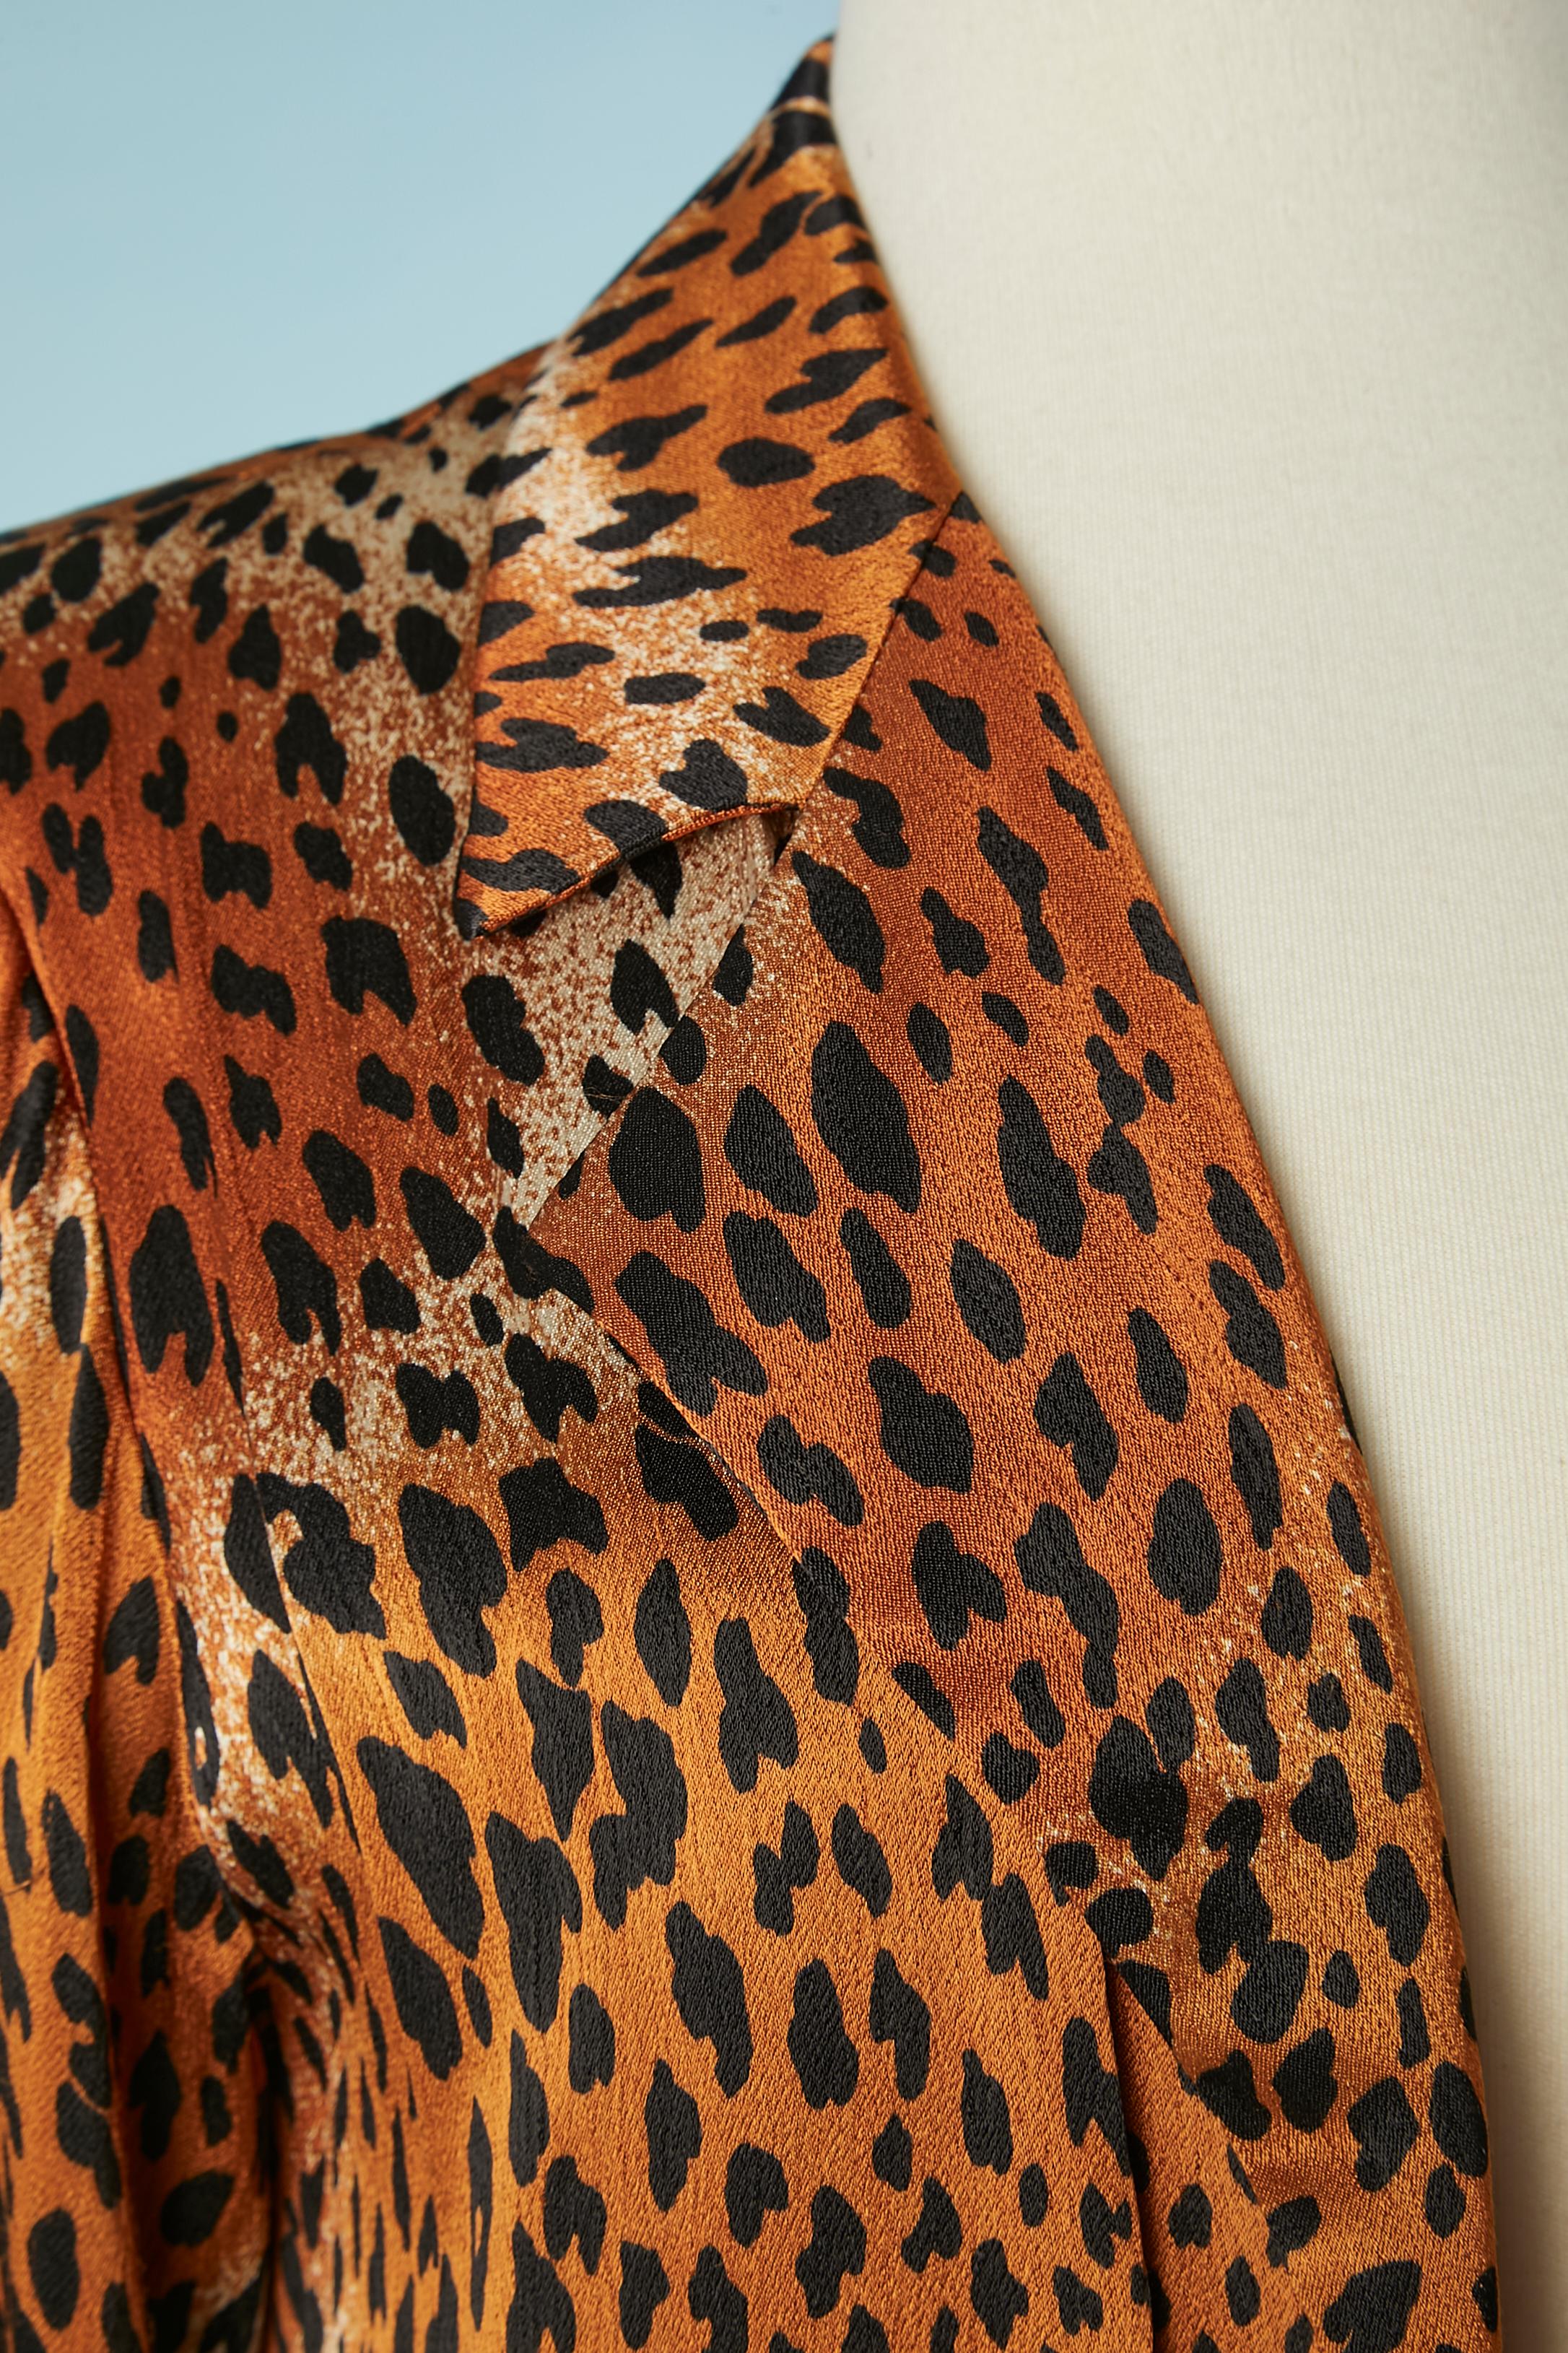 Leopard printed edge to edge evening jacket.
No fabric composition but probably rayon. Silk lining. 
SIZE L 